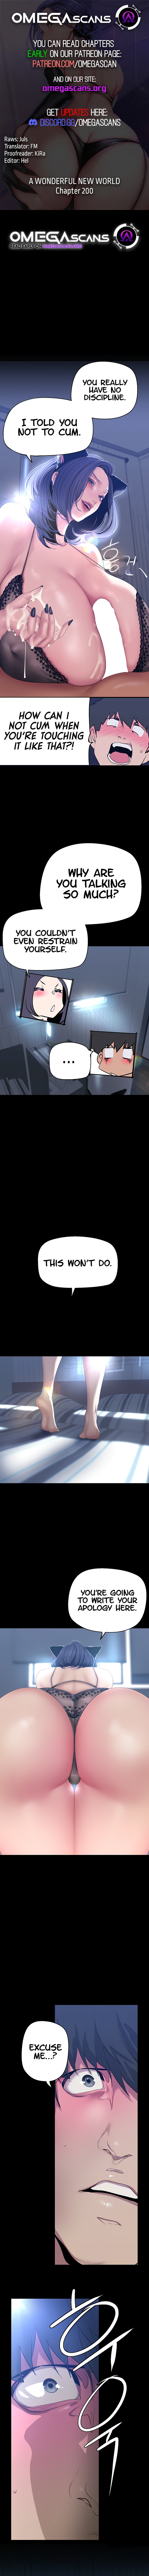 Panel Image 1 for chapter 200 of manhwa A Wonderful New World on read.oppai.stream